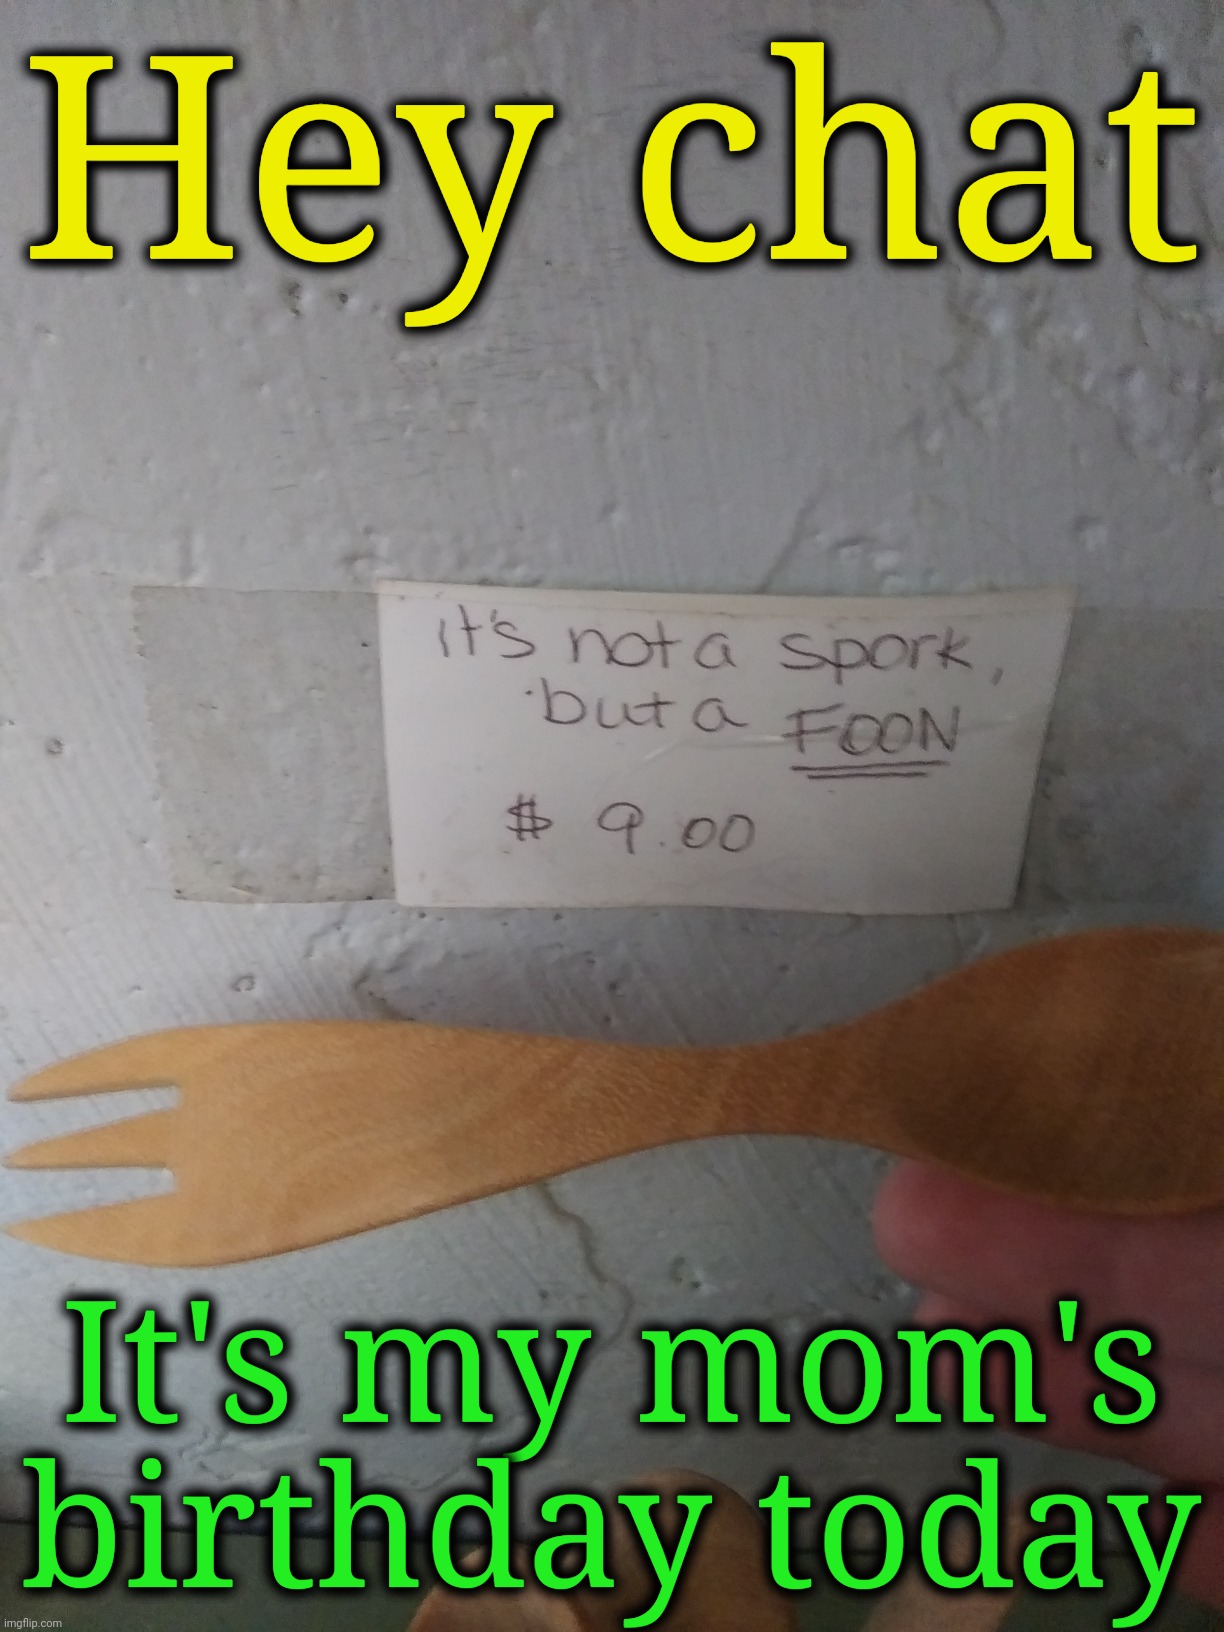 Not a spork | Hey chat; It's my mom's birthday today | image tagged in not a spork | made w/ Imgflip meme maker